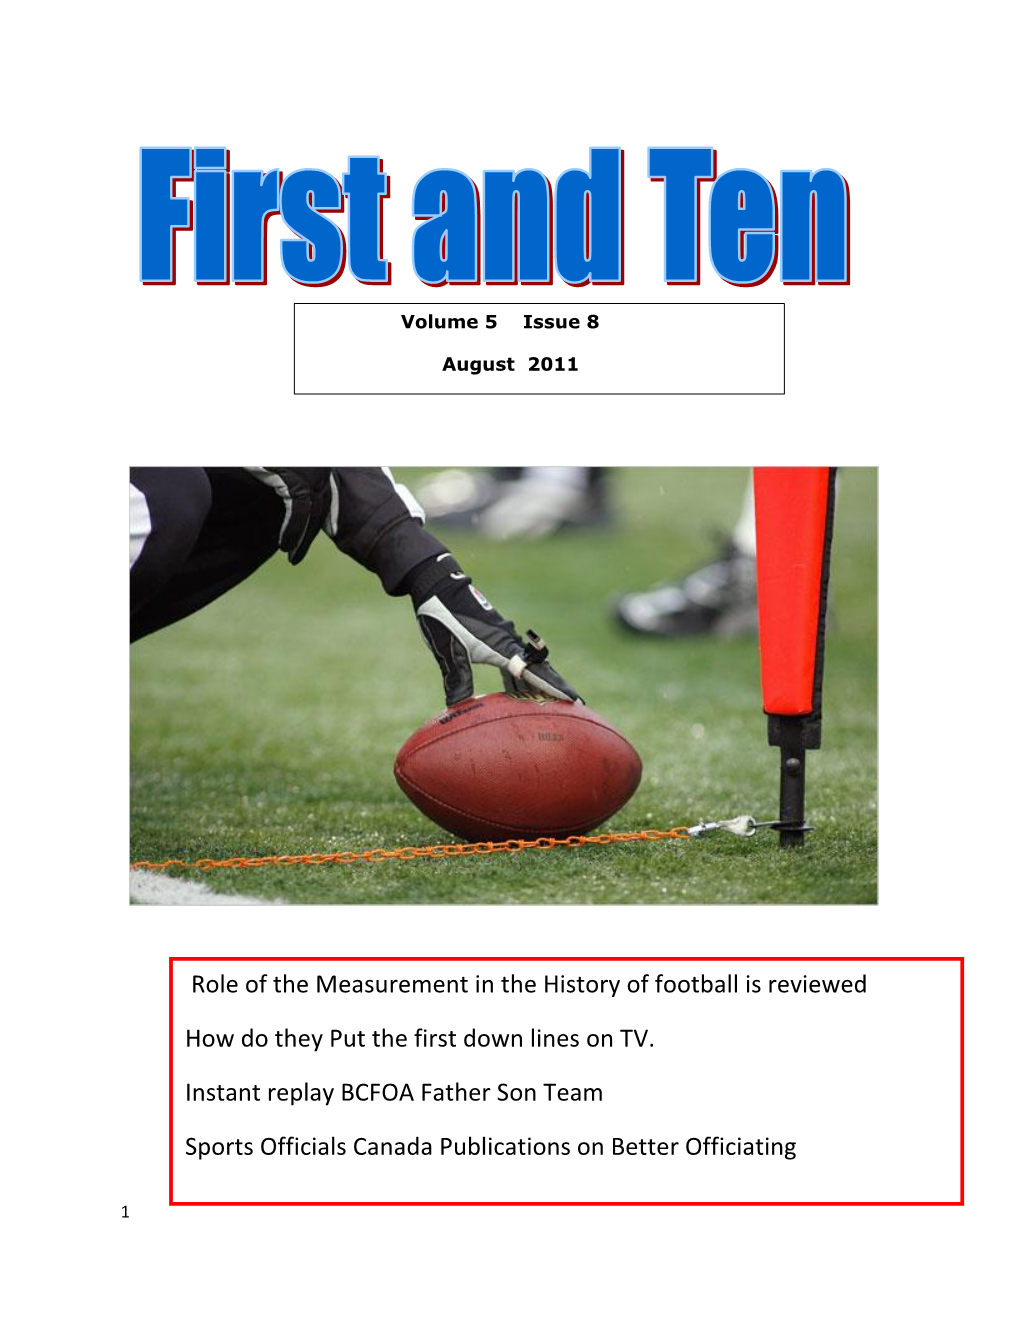 Role of the Measurement in the History of Football Is Reviewed How